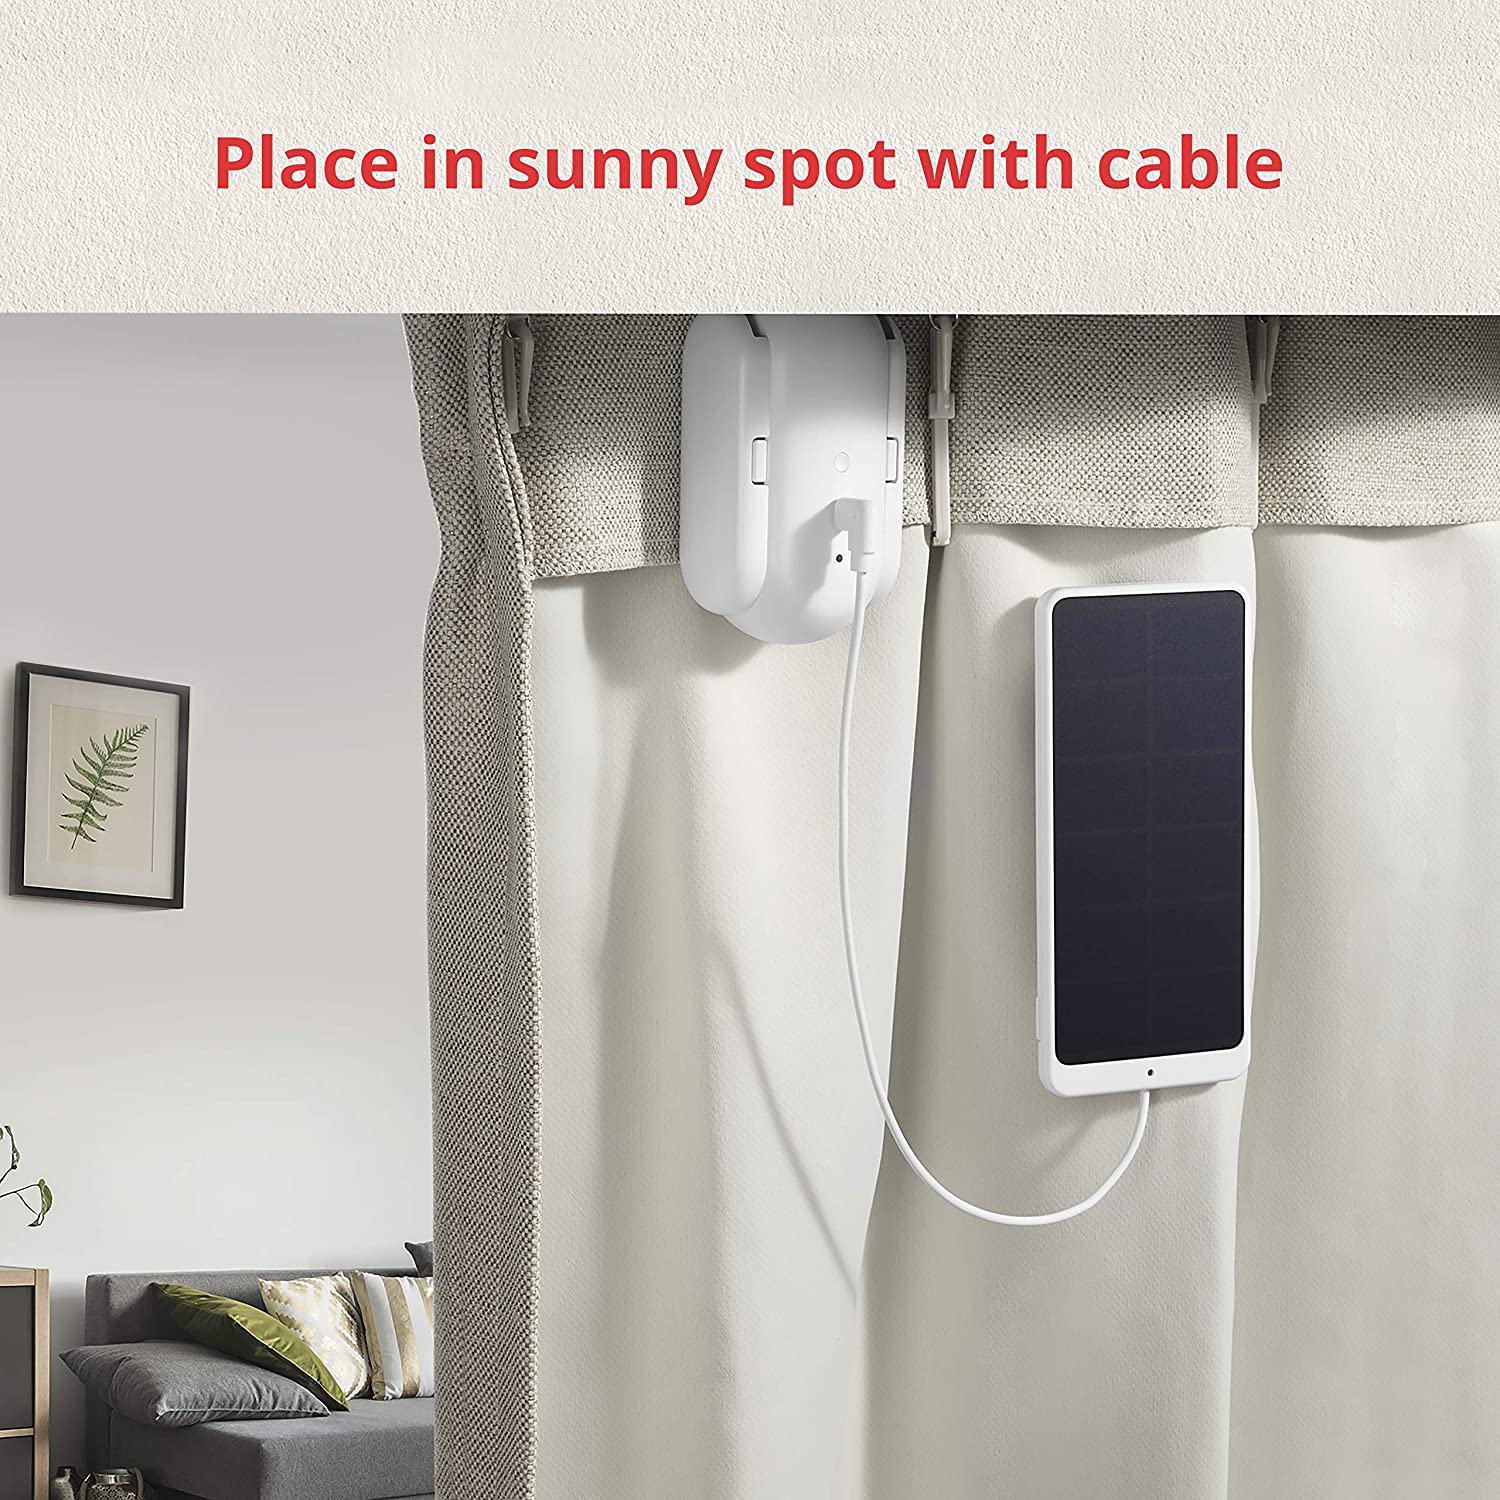 SwitchBot Solar Panel Charger | Works with U/Rod/I SwitchBot Curtain Models